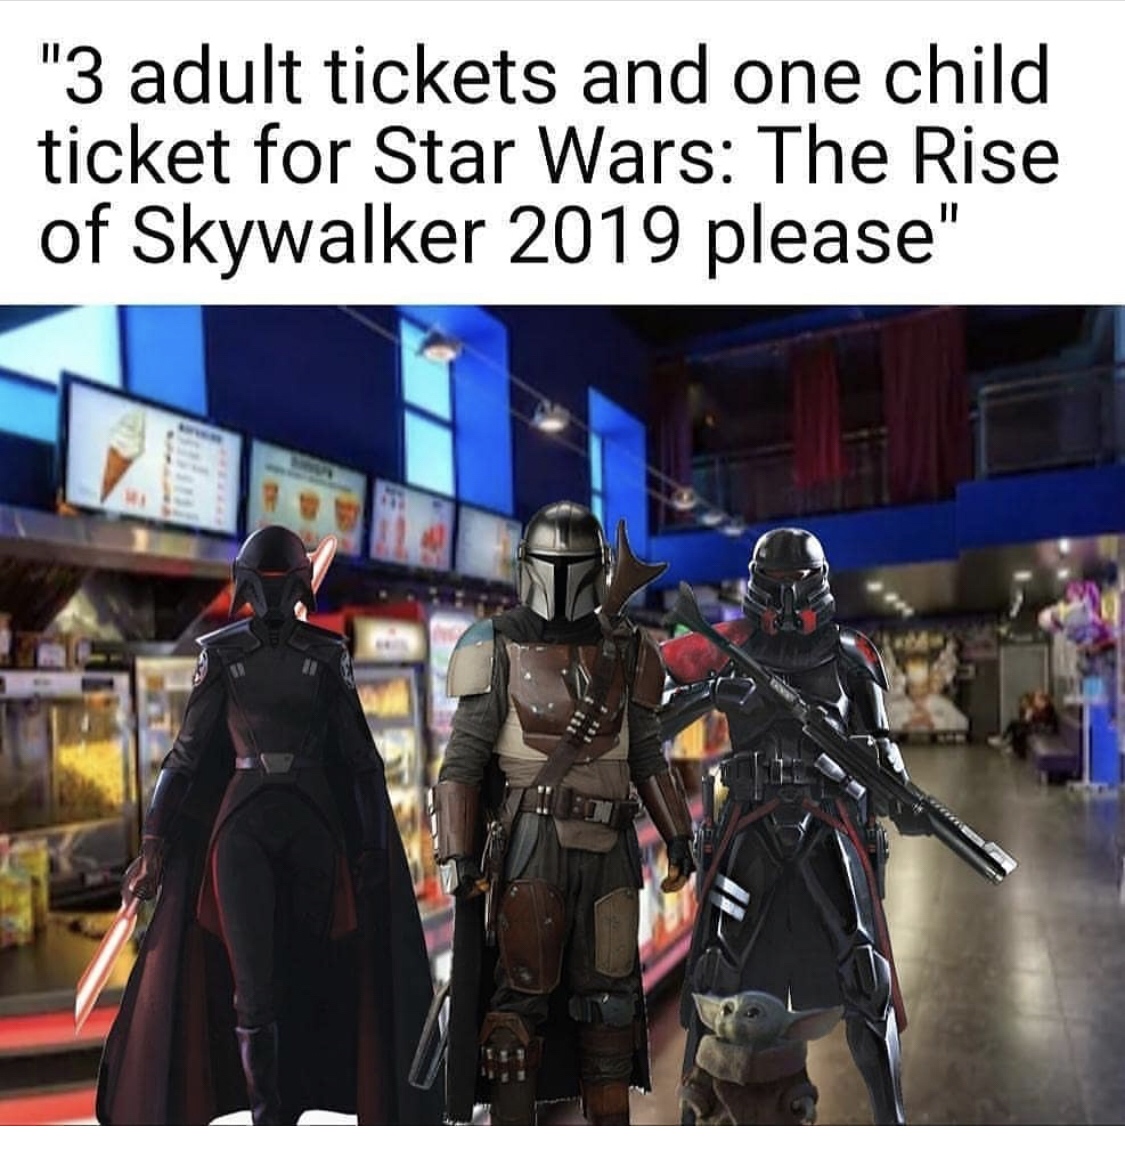 games - "3 adult tickets and one child ticket for Star Wars The Rise of Skywalker 2019 please"